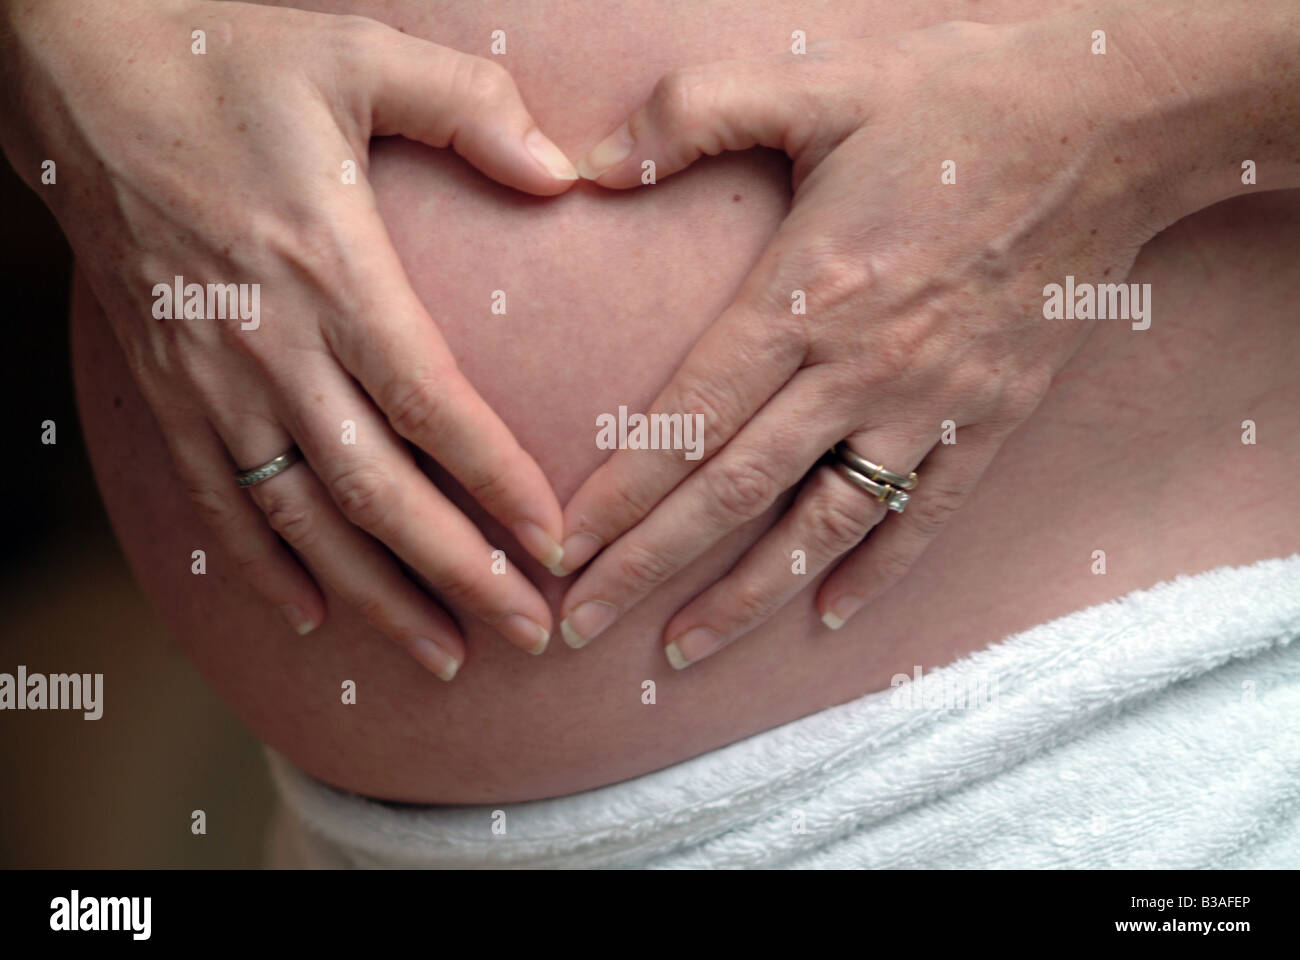 loveheart pregnant female detail stomach love woman beauty positive having children maternity pure sensitive caucasian young Stock Photo